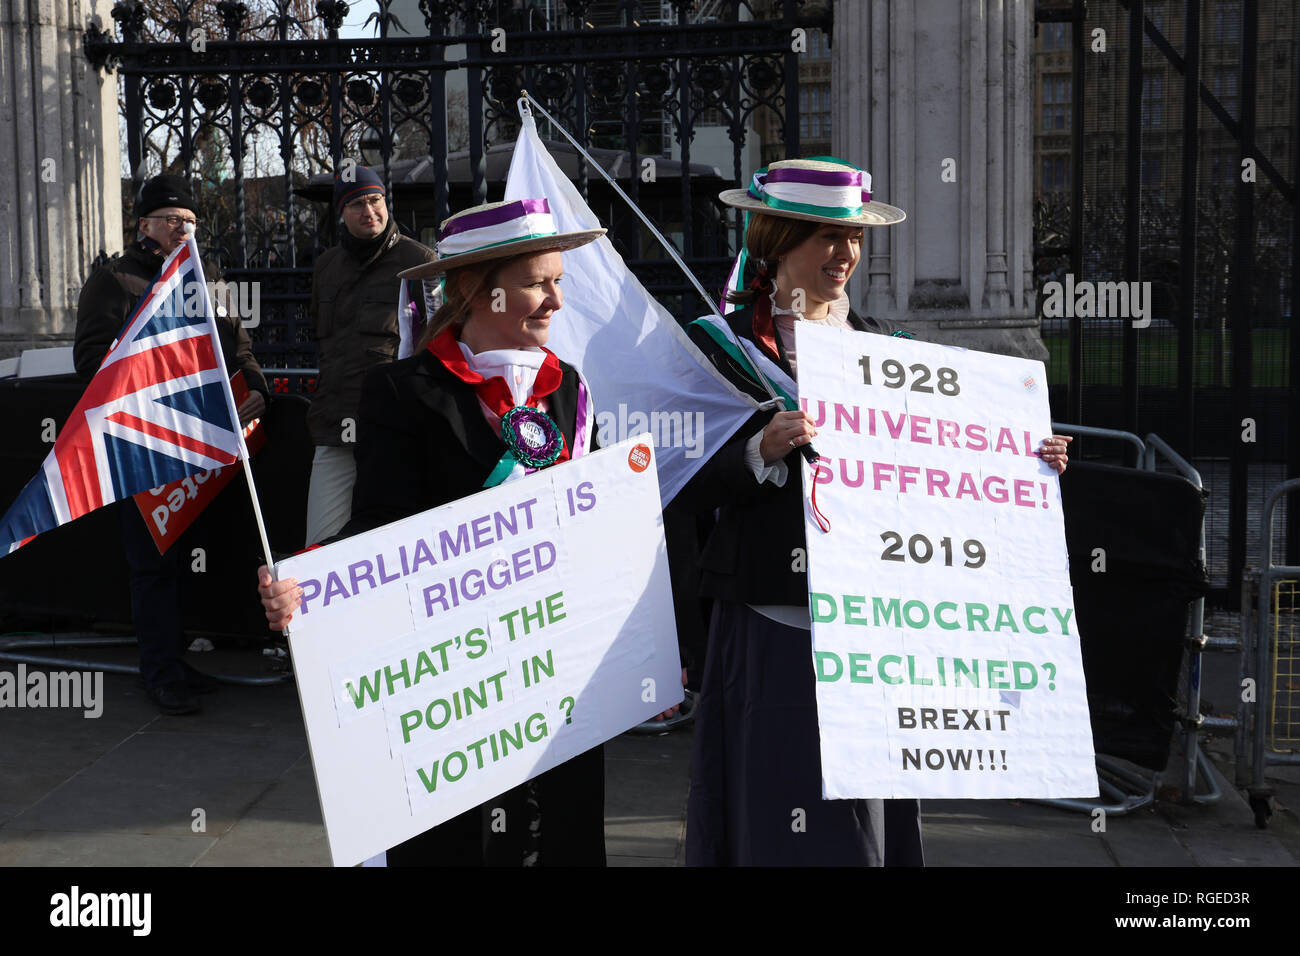 London, UK. 29th January 2019. Two Leave protesters campaigning with boards referring to universal suffrage, Parliament Square , London, UK. Credit: Joe Kuis /Alamy Live News Stock Photo